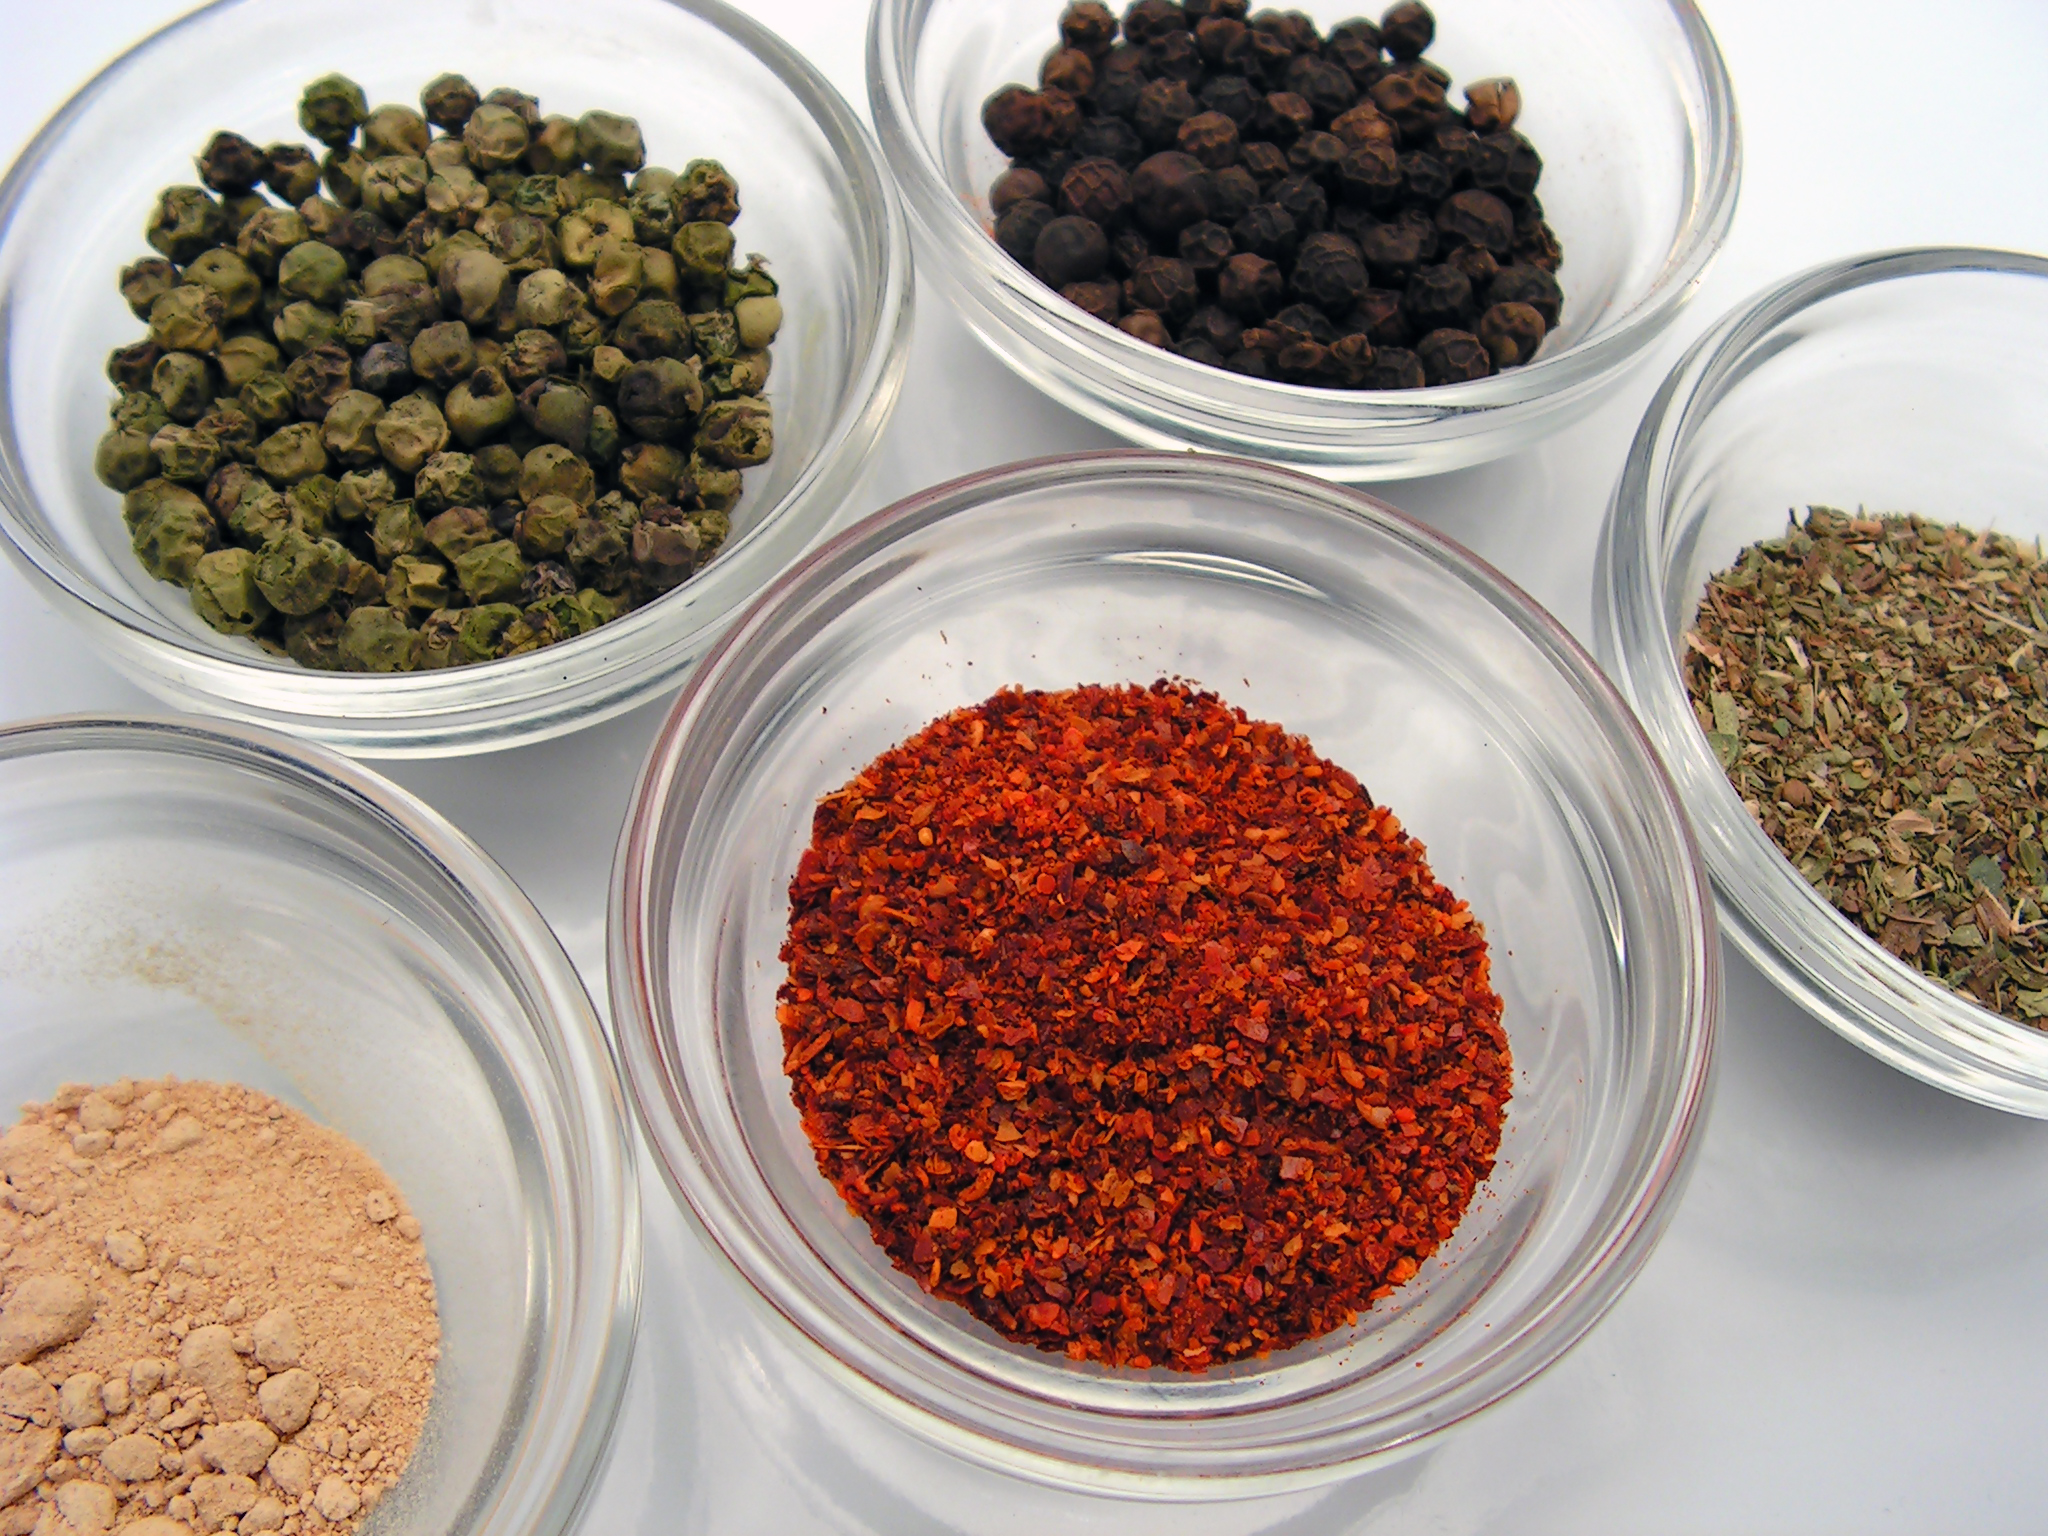 Incorporate Herbs/Spices Into Cooking